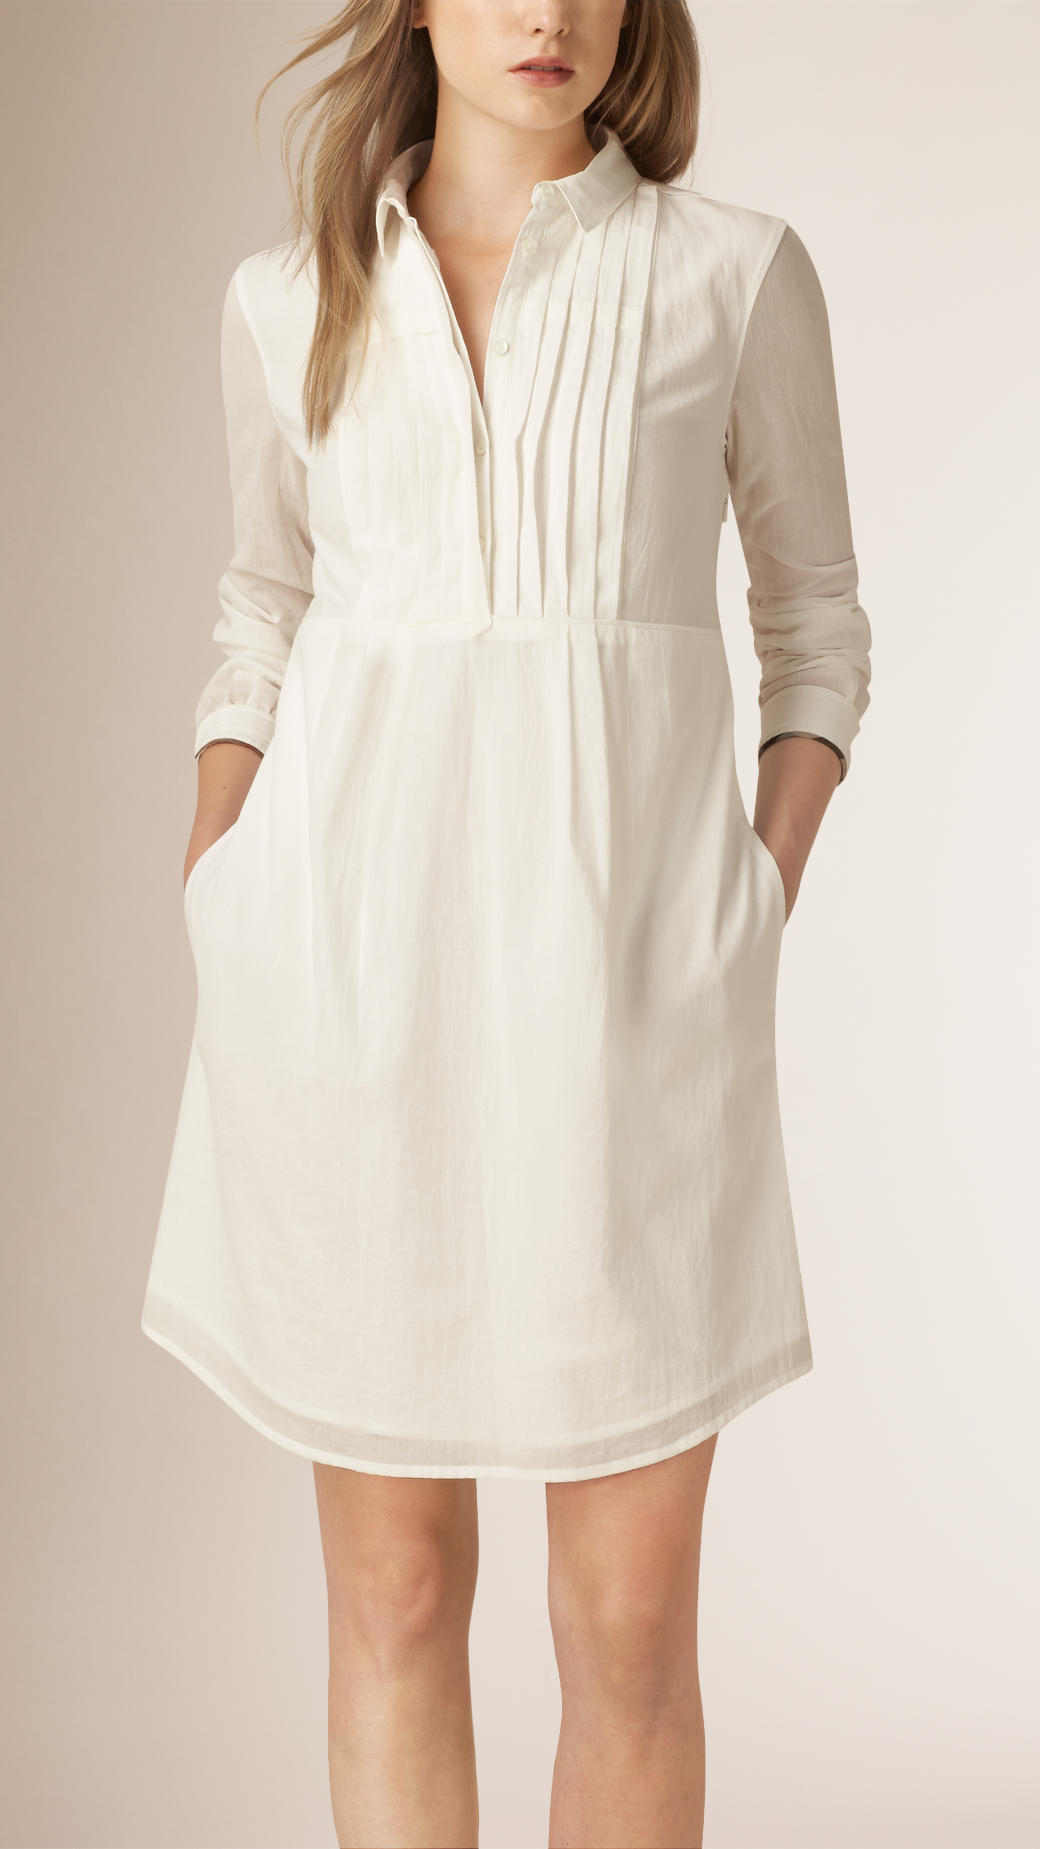 Burberry Pleat Detail Cotton Shirt Dress in White | Lyst